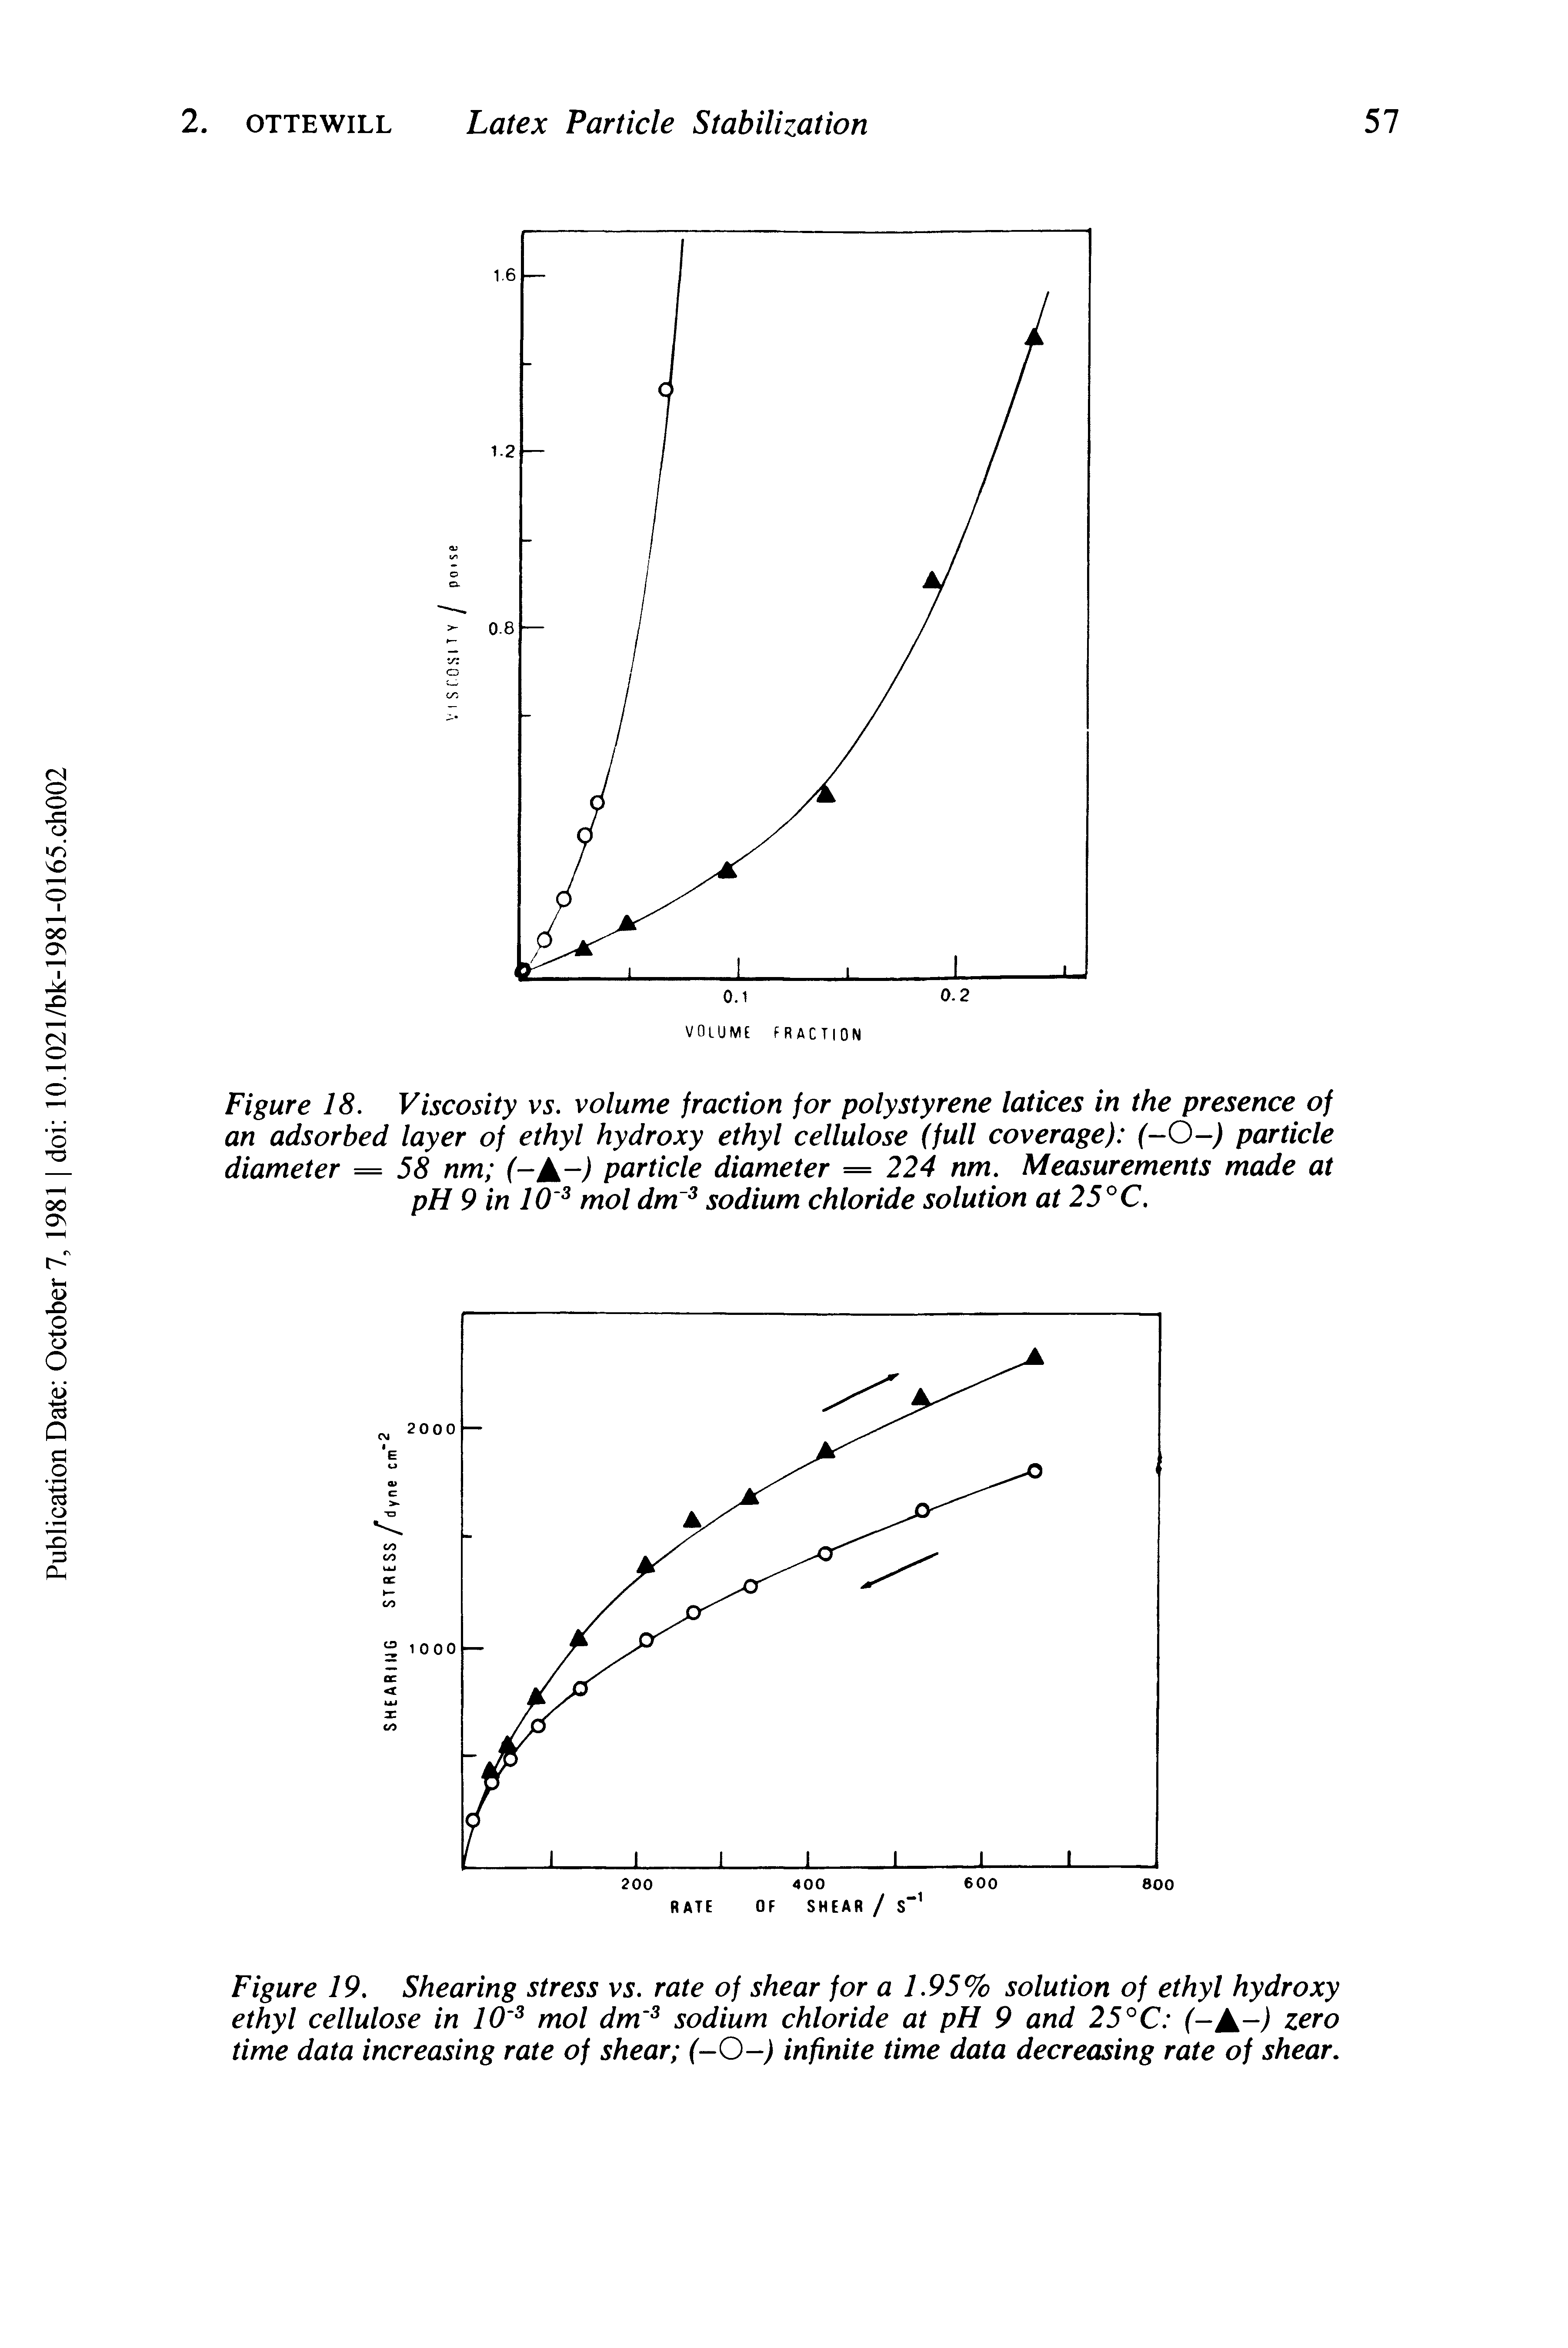 Figure 19. Shearing stress vs. rate of shear for a 1.95% solution of ethyl hydroxy ethyl cellulose in 10 3 mol dm 3 sodium chloride at pH 9 and 25°C ( A ) zero time data increasing rate of shear (-Q-) infinite time data decreasing rate of shear.